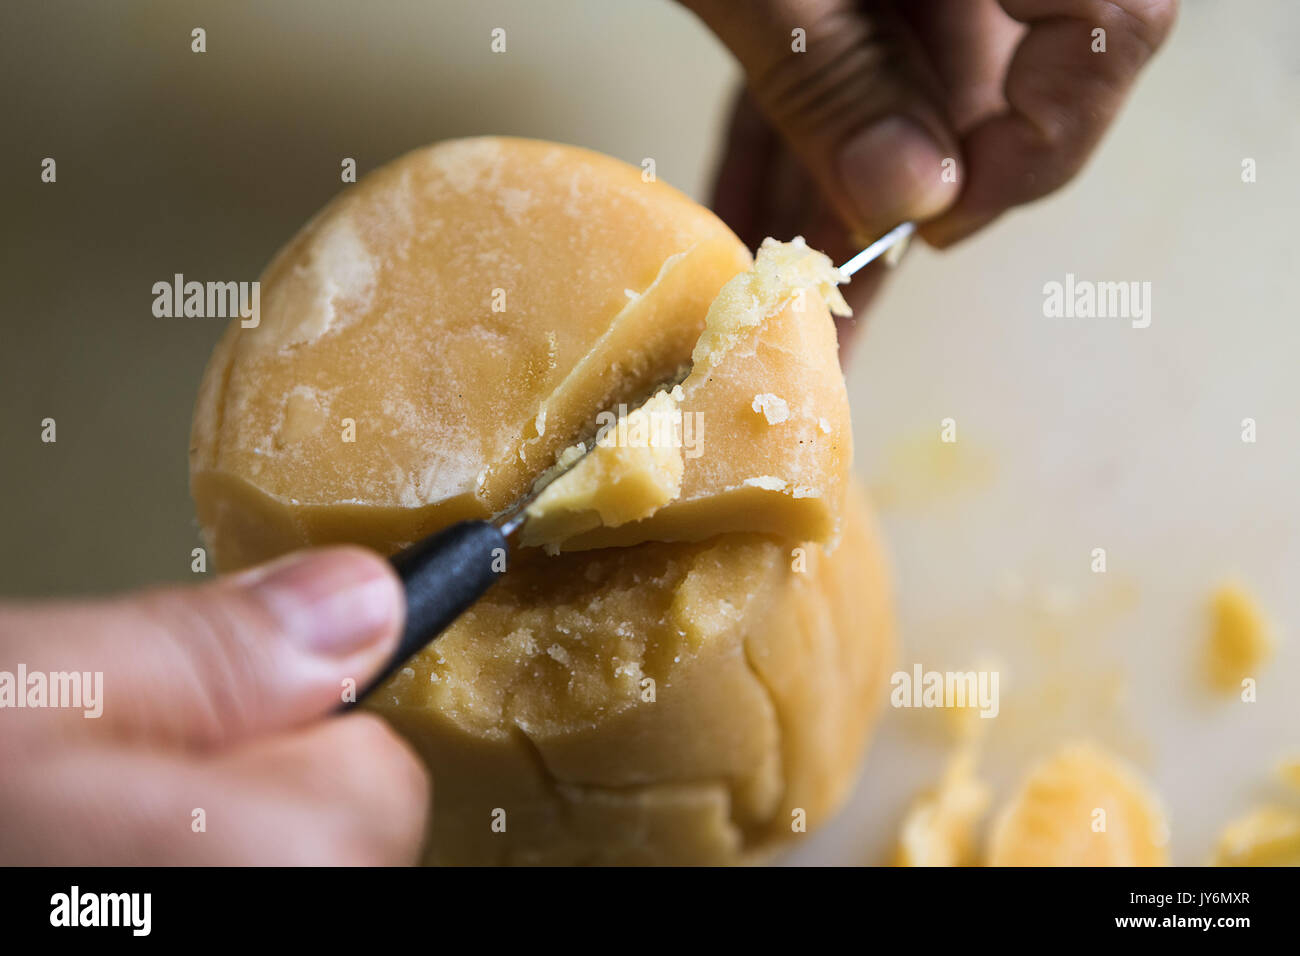 close up of adult male hands holding a knife with both hands and cutting jaggery block Stock Photo